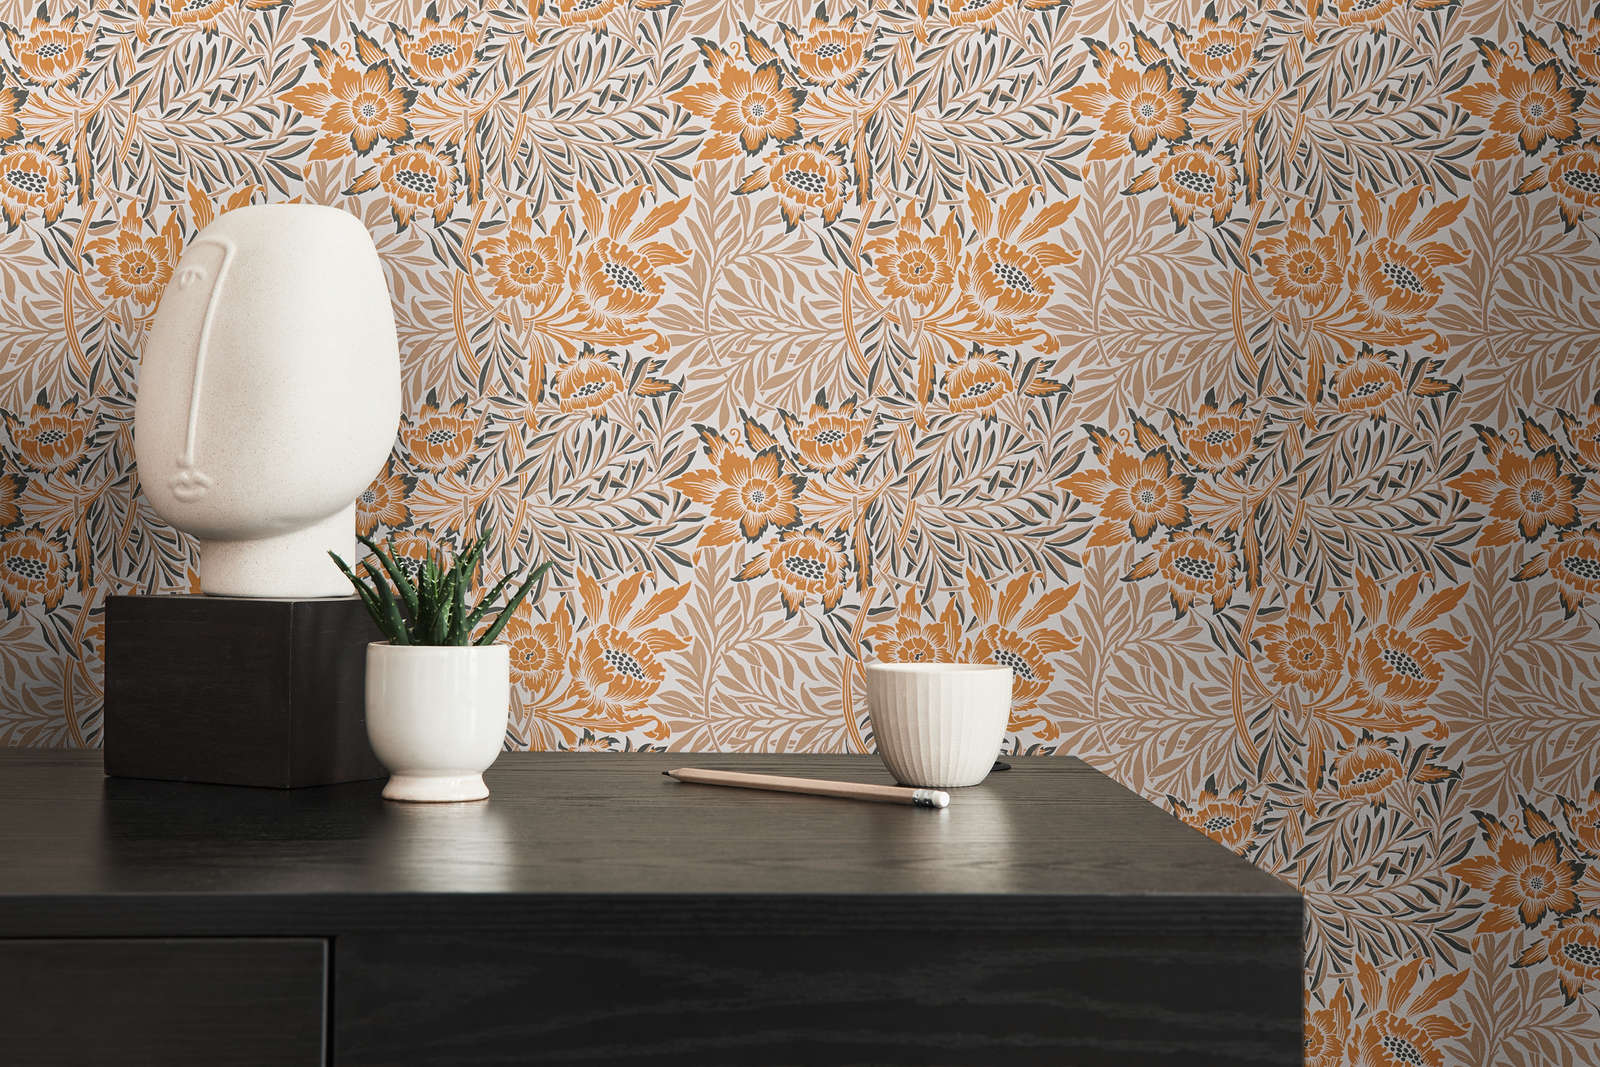             Non-woven wallpaper with flowers and leaf tendrils - orange, beige, white
        